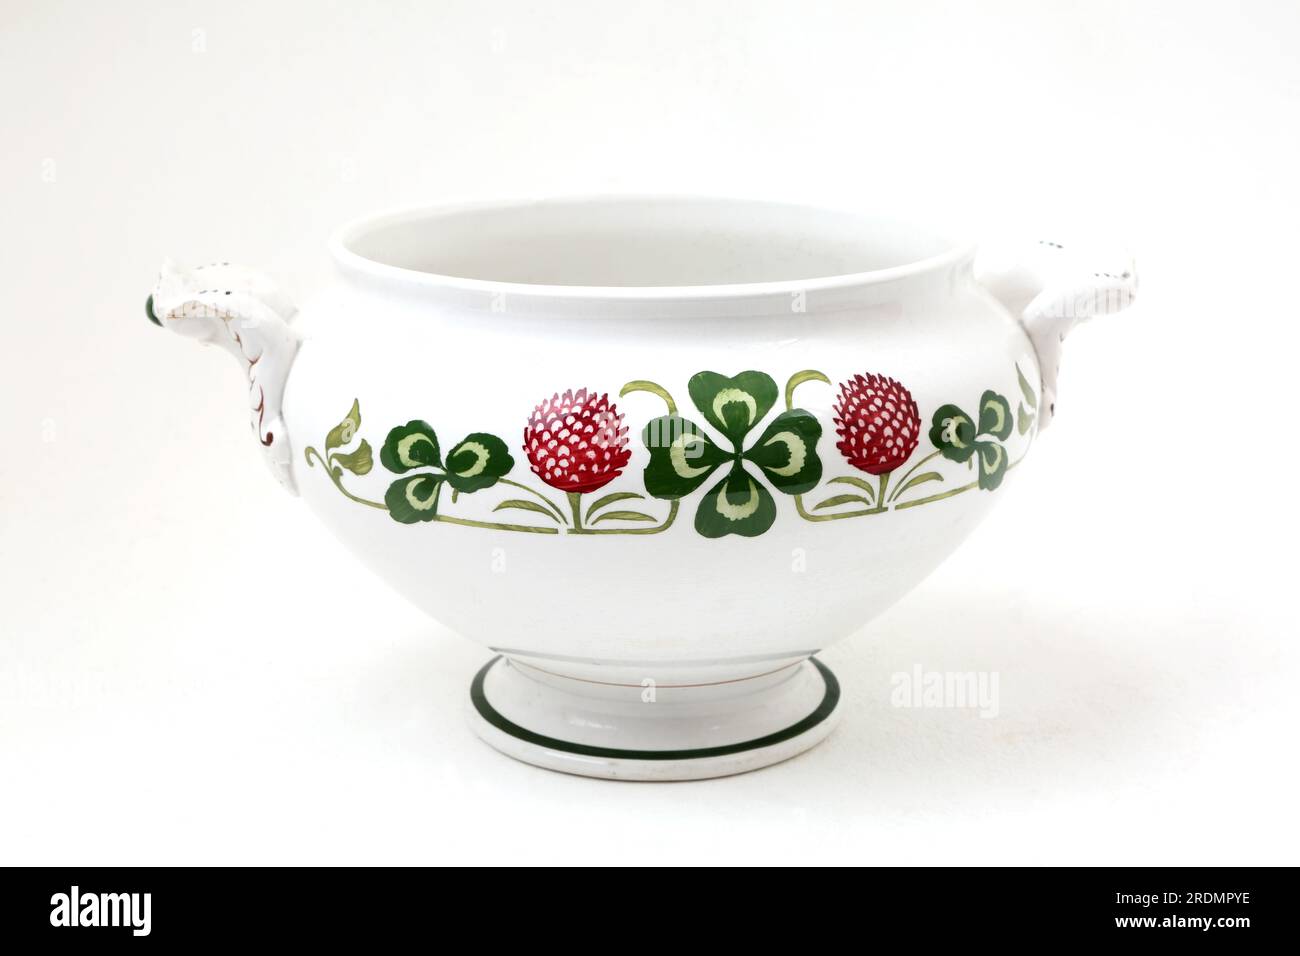 Vintage Villeroy and Boch Ceramic Soup Bowl From Dresden Germany Stock Photo